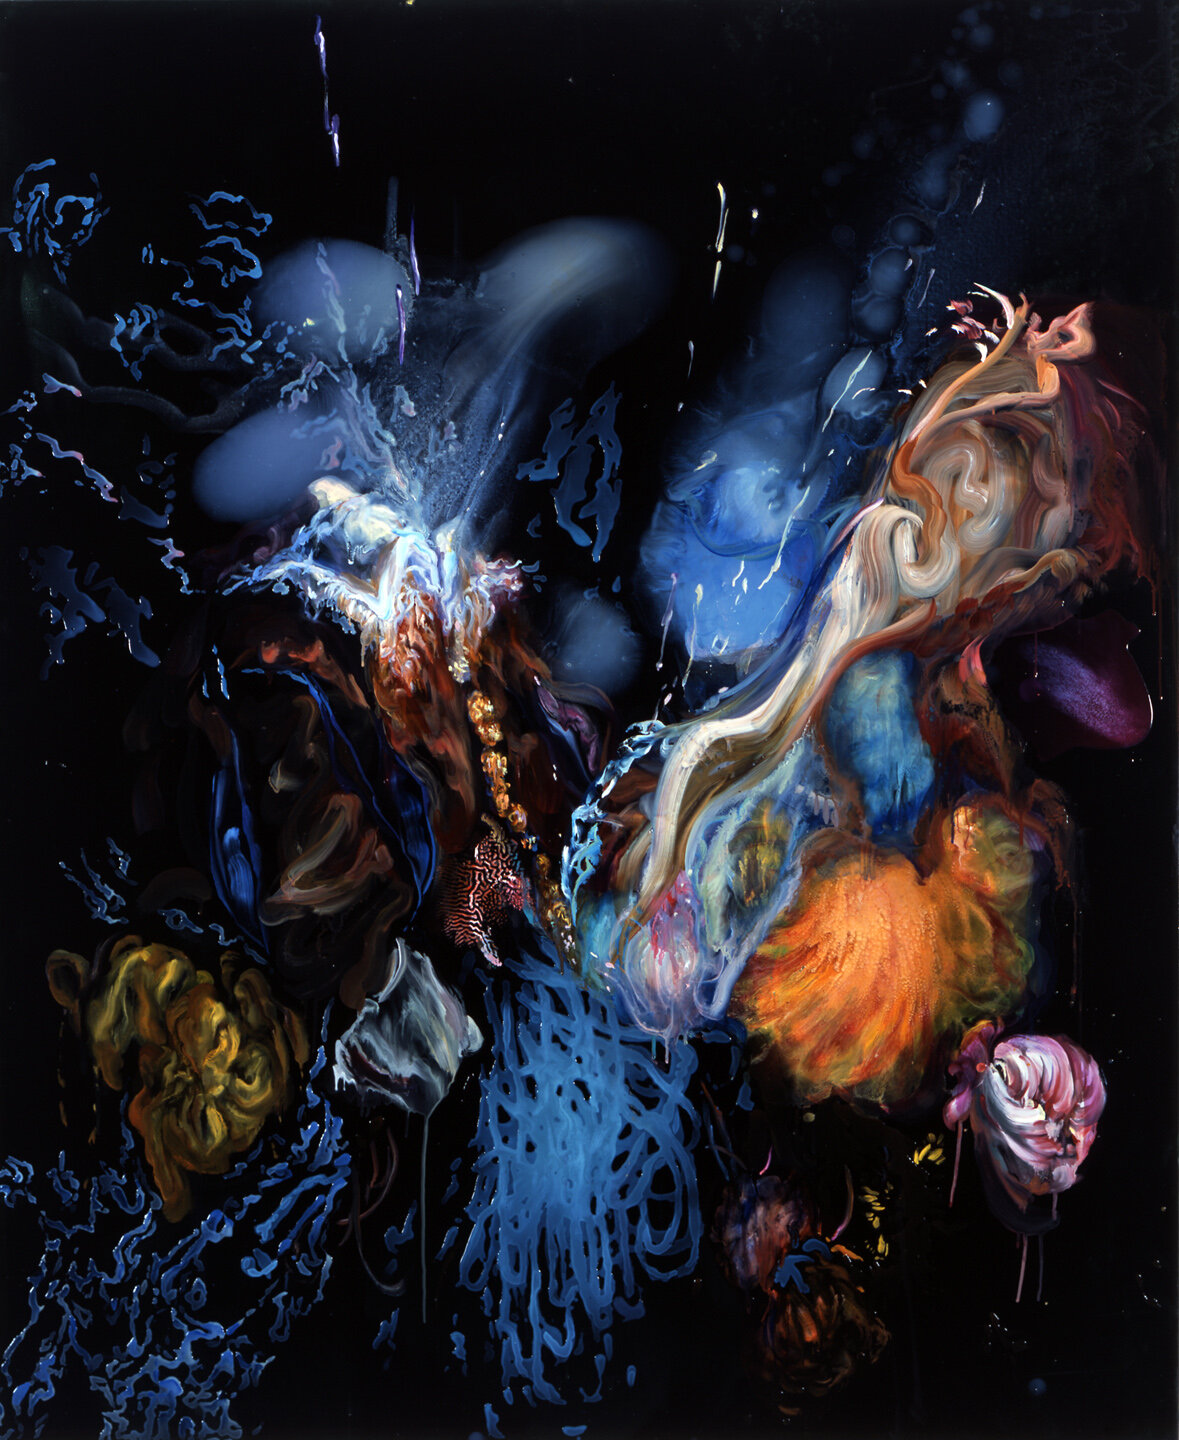  2006 oil and resin on canvas 160x130cm 